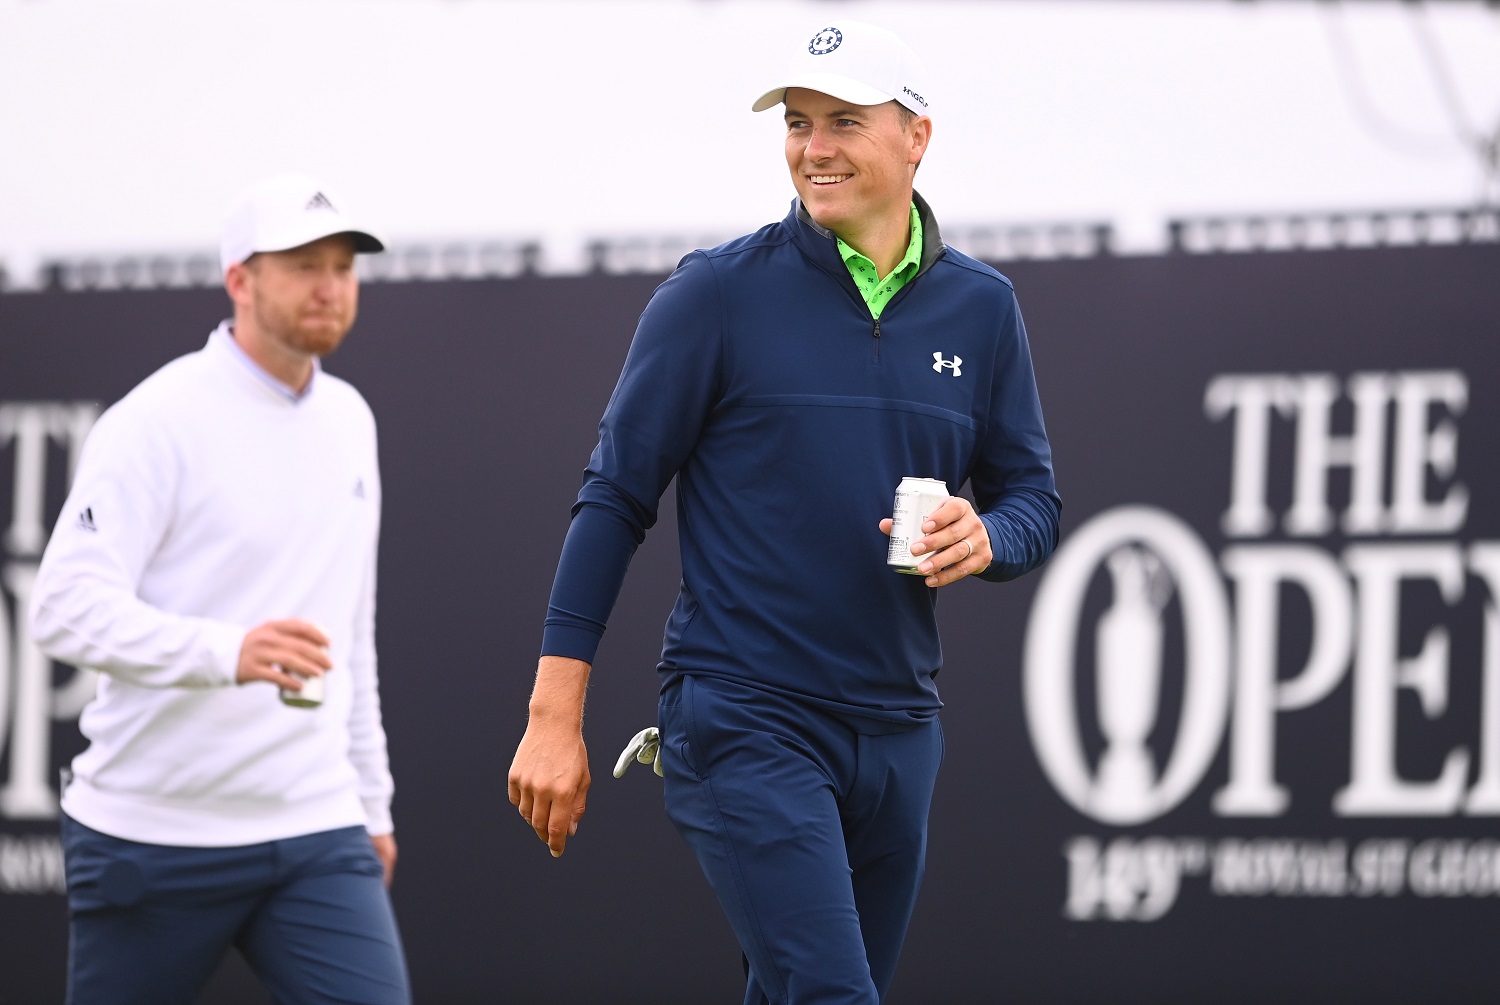 Jordan Spieth smiles during a practice round for The 149th Open at Royal St George’s Golf Club in Sandwich, England. | Trump/R&A/R&A via Getty Images